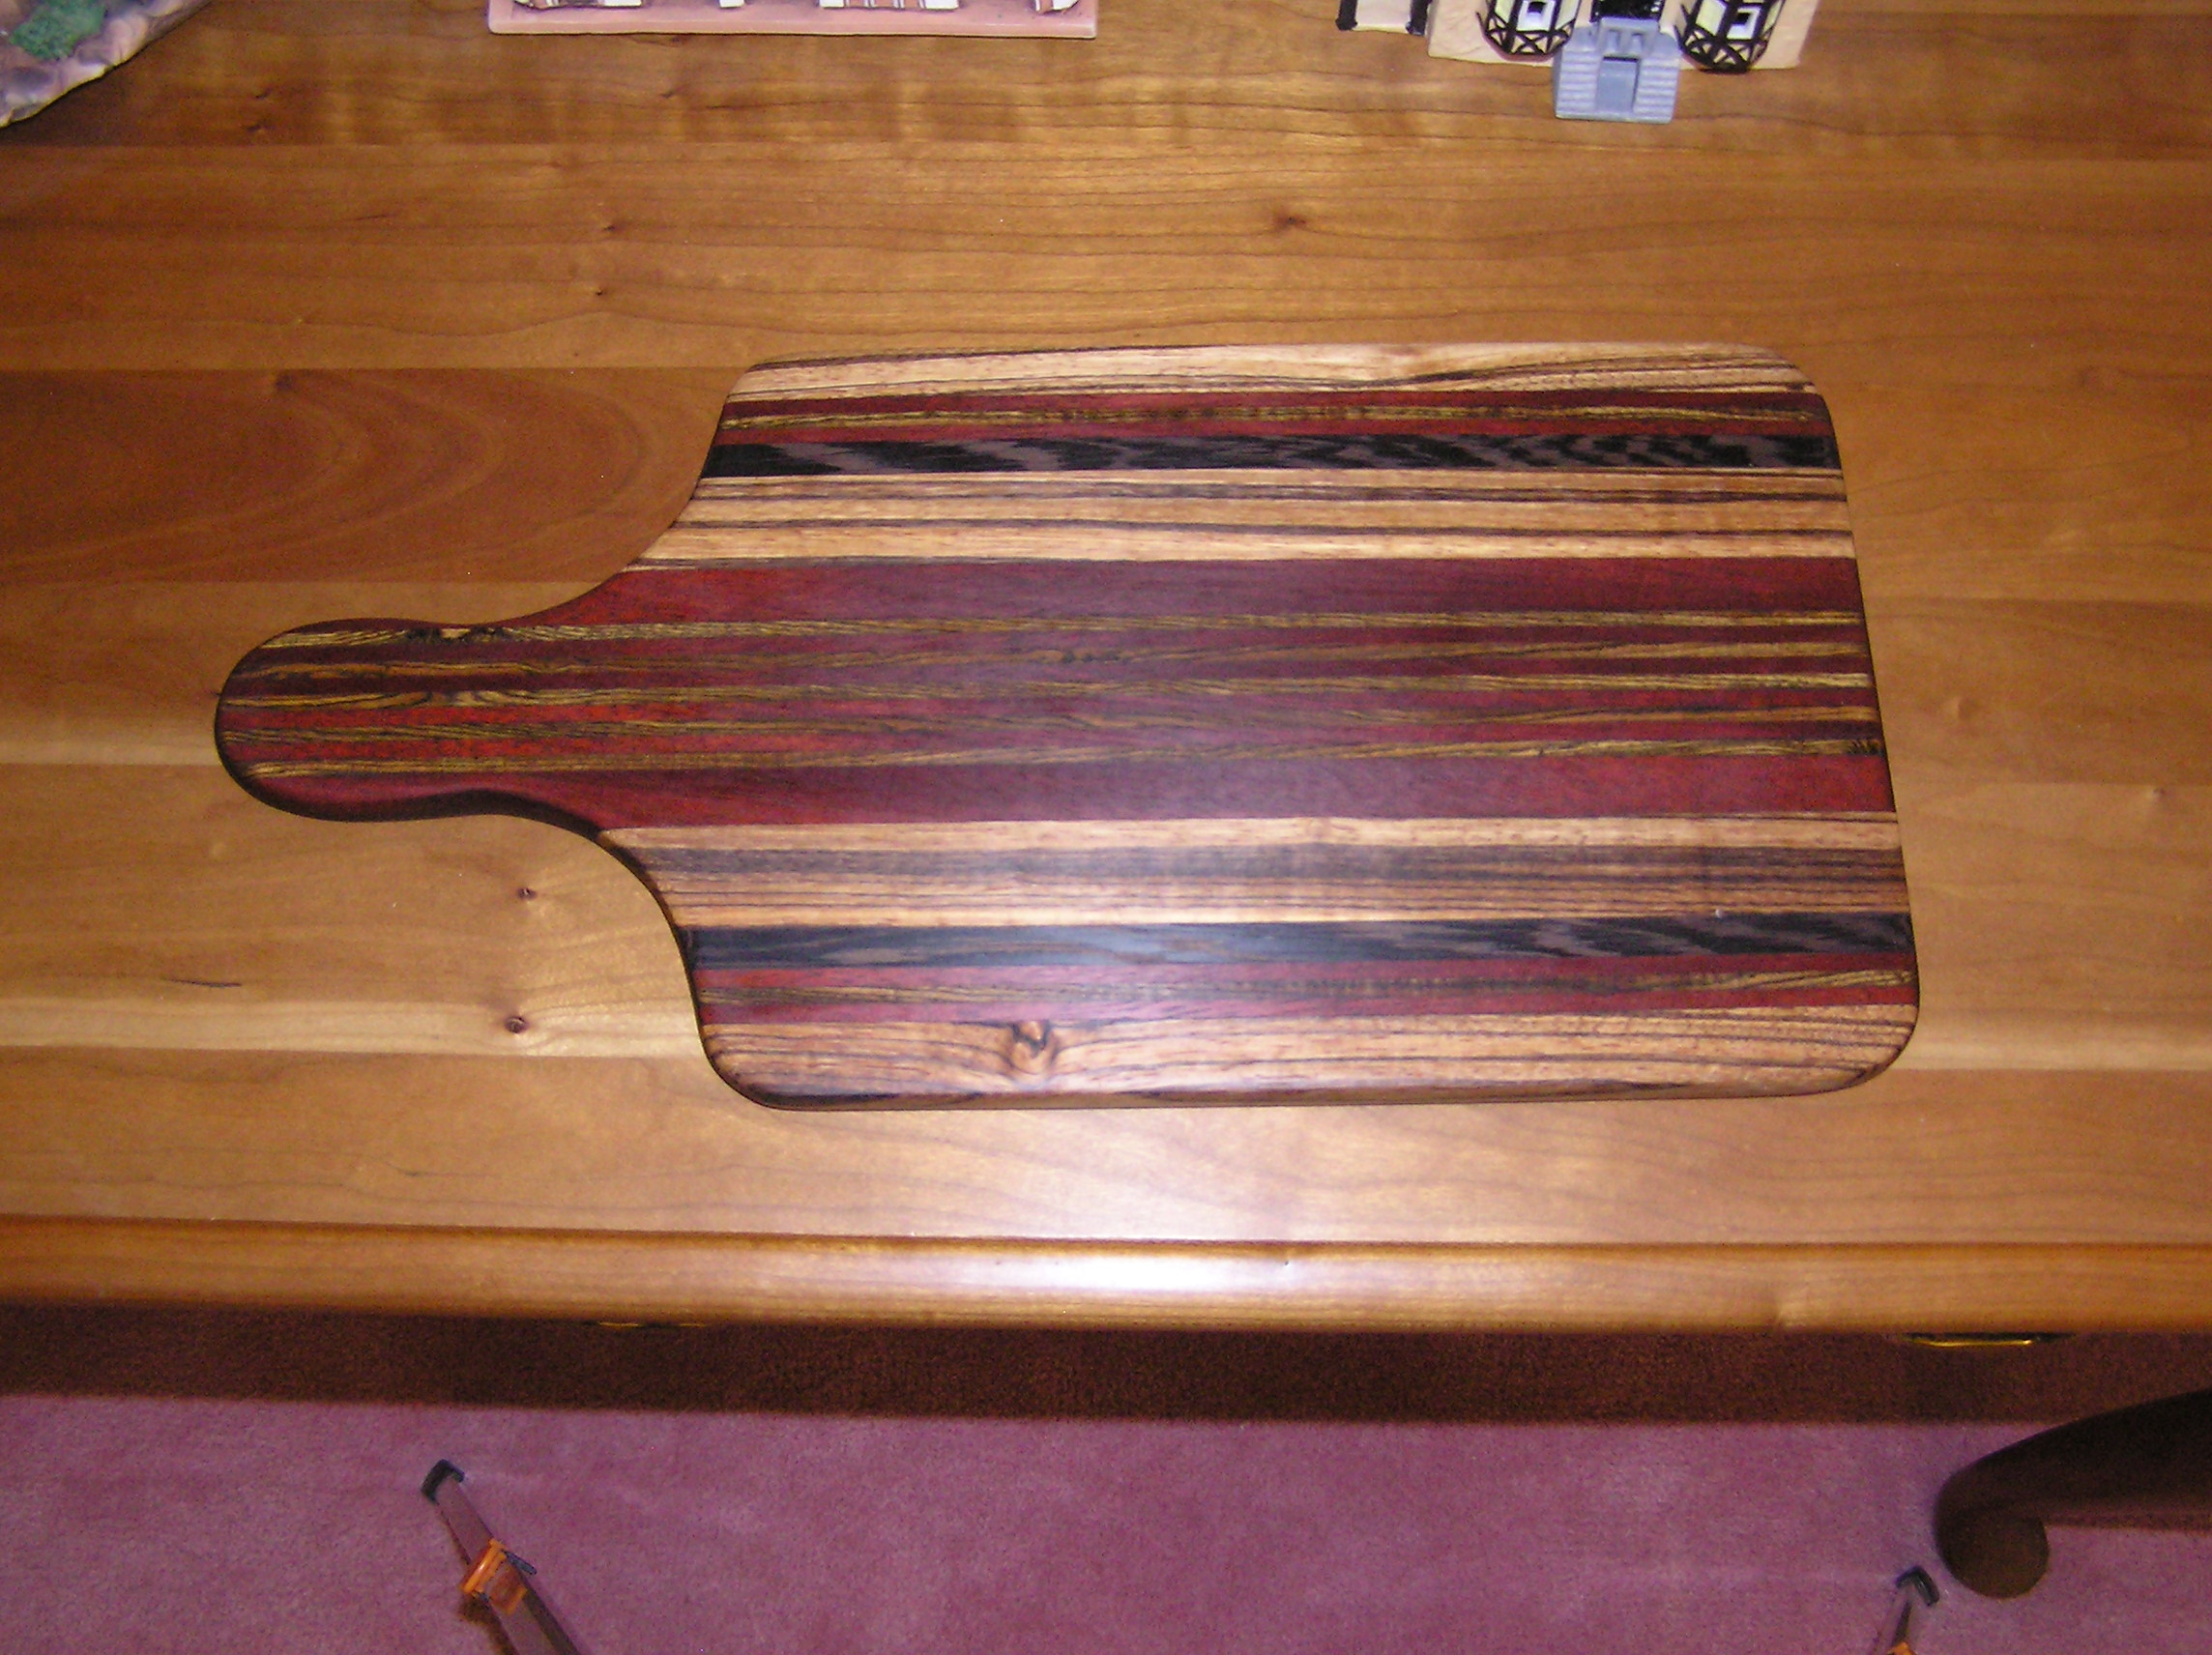 https://www.woodworkerssource.com/blog/wp-content/uploads/2009/11/Woodworking_Projects_019.jpg